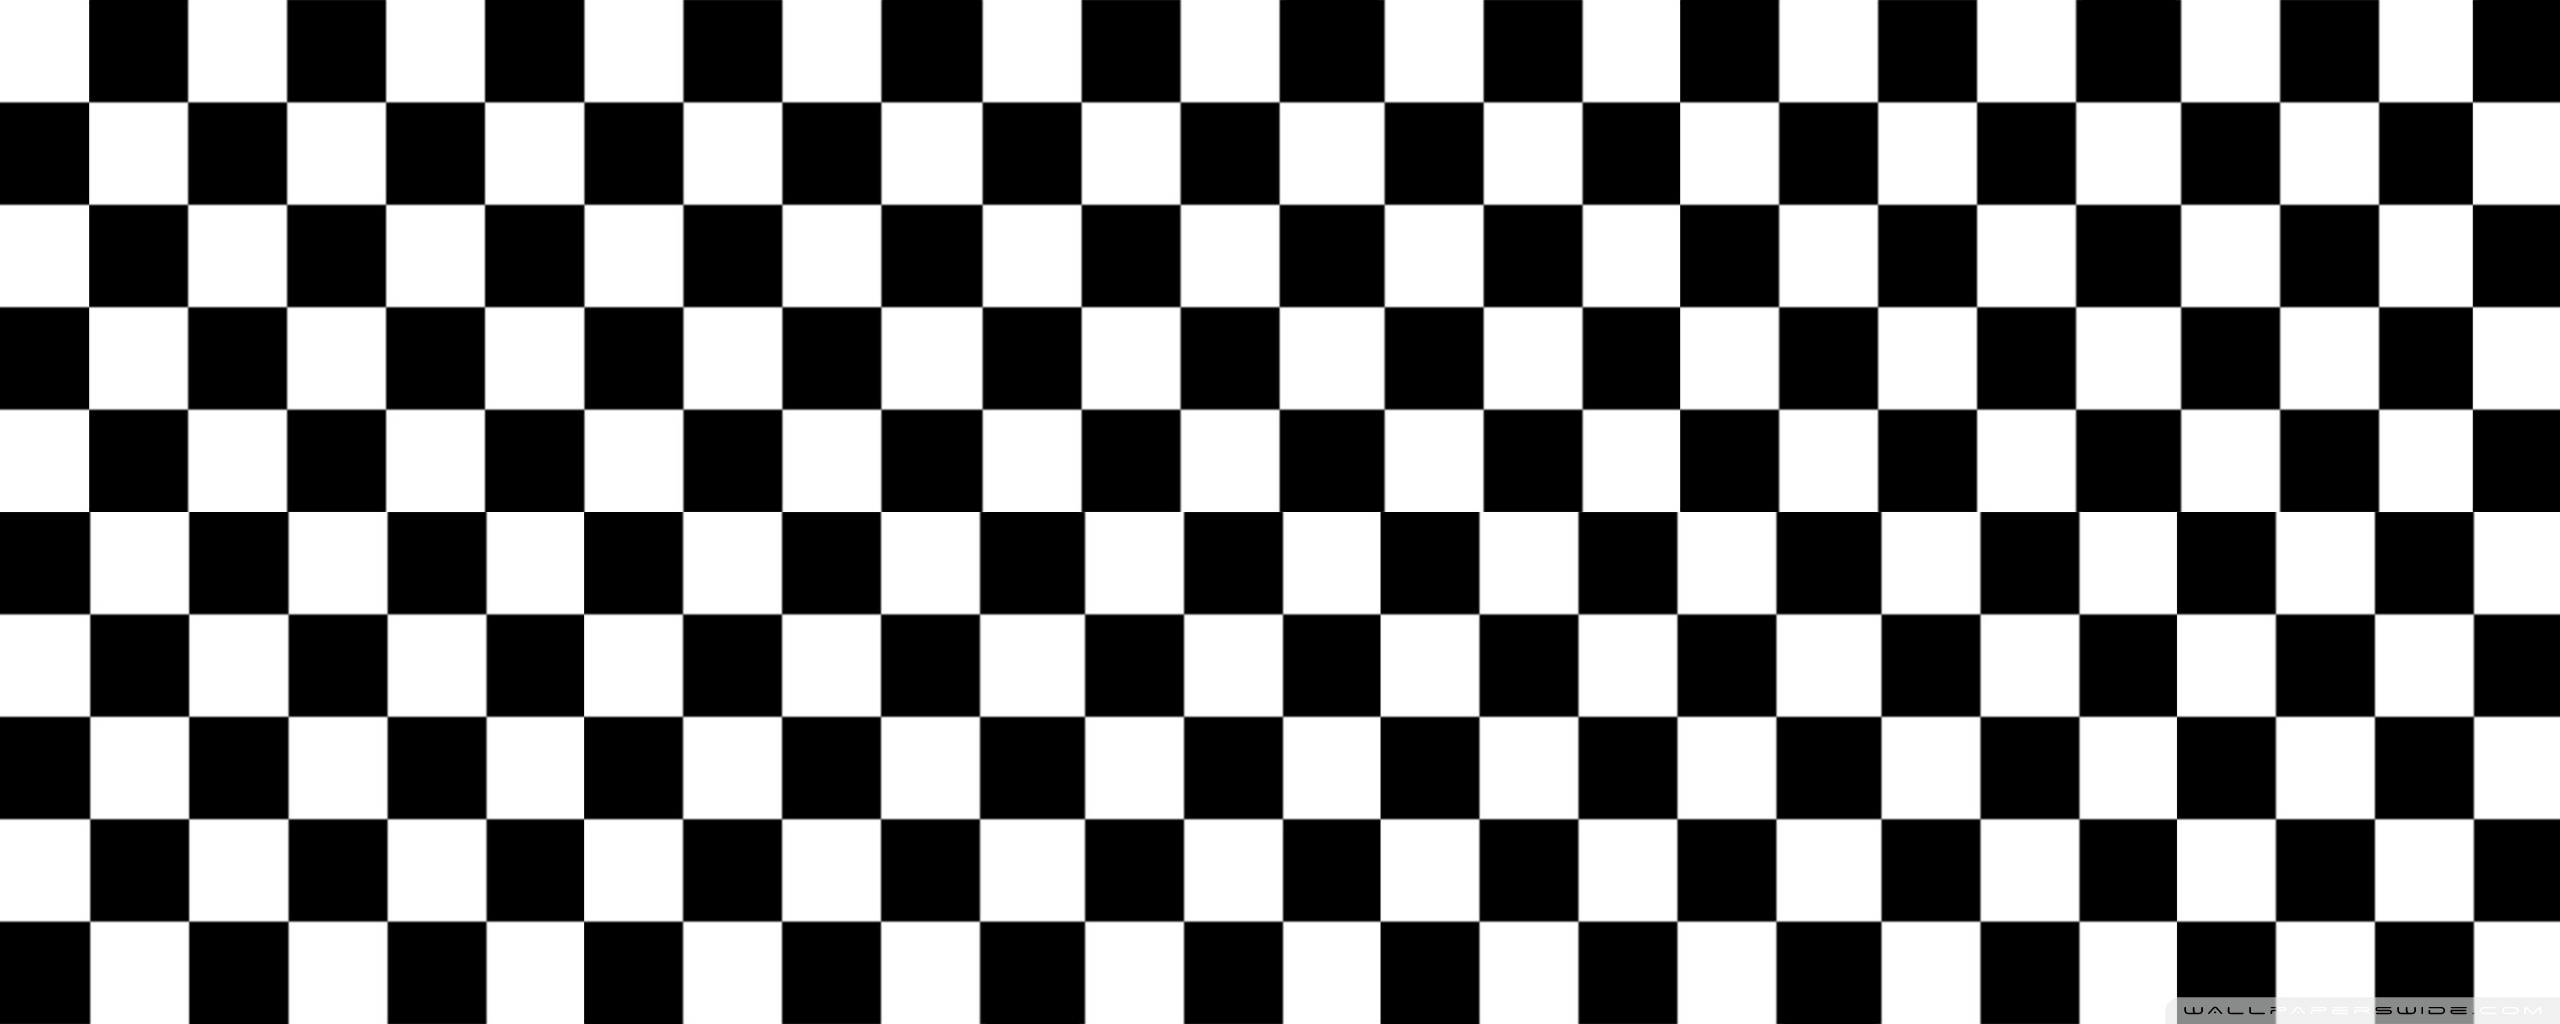 Download 21 aesthetic-2560x1440-wallpapers Black-and-White-Checkerboard-Wallpaper-47-images.jpg